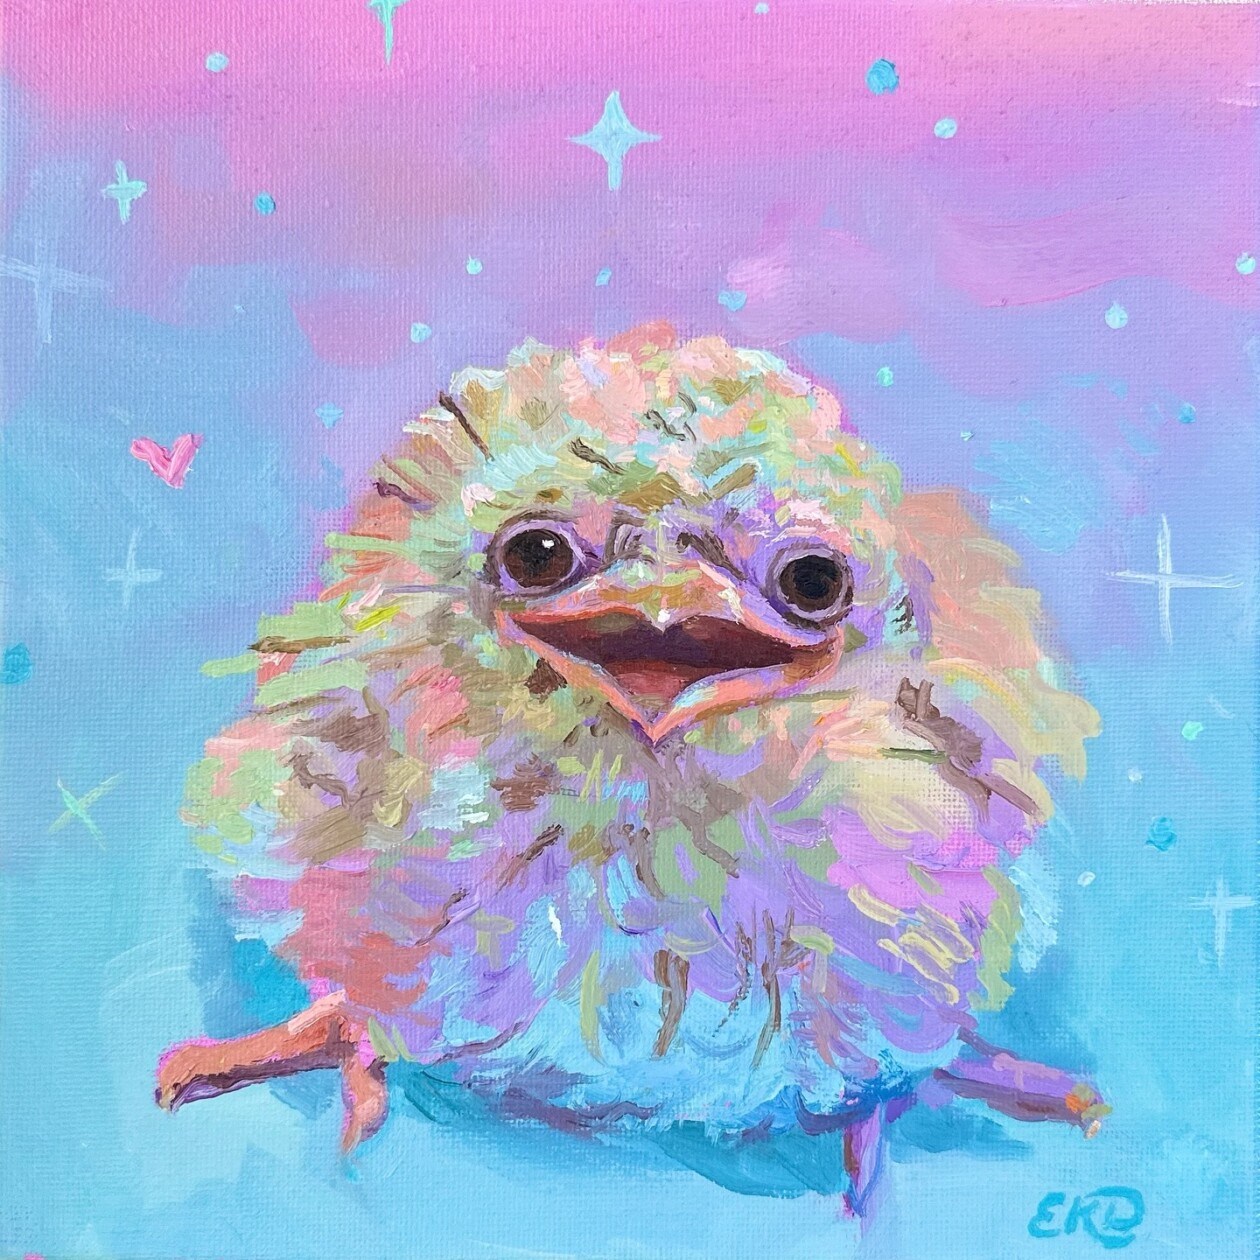 Cute And Lovely Oil And Acrylic Paintings Of Animals By Emily Dunlap (11)